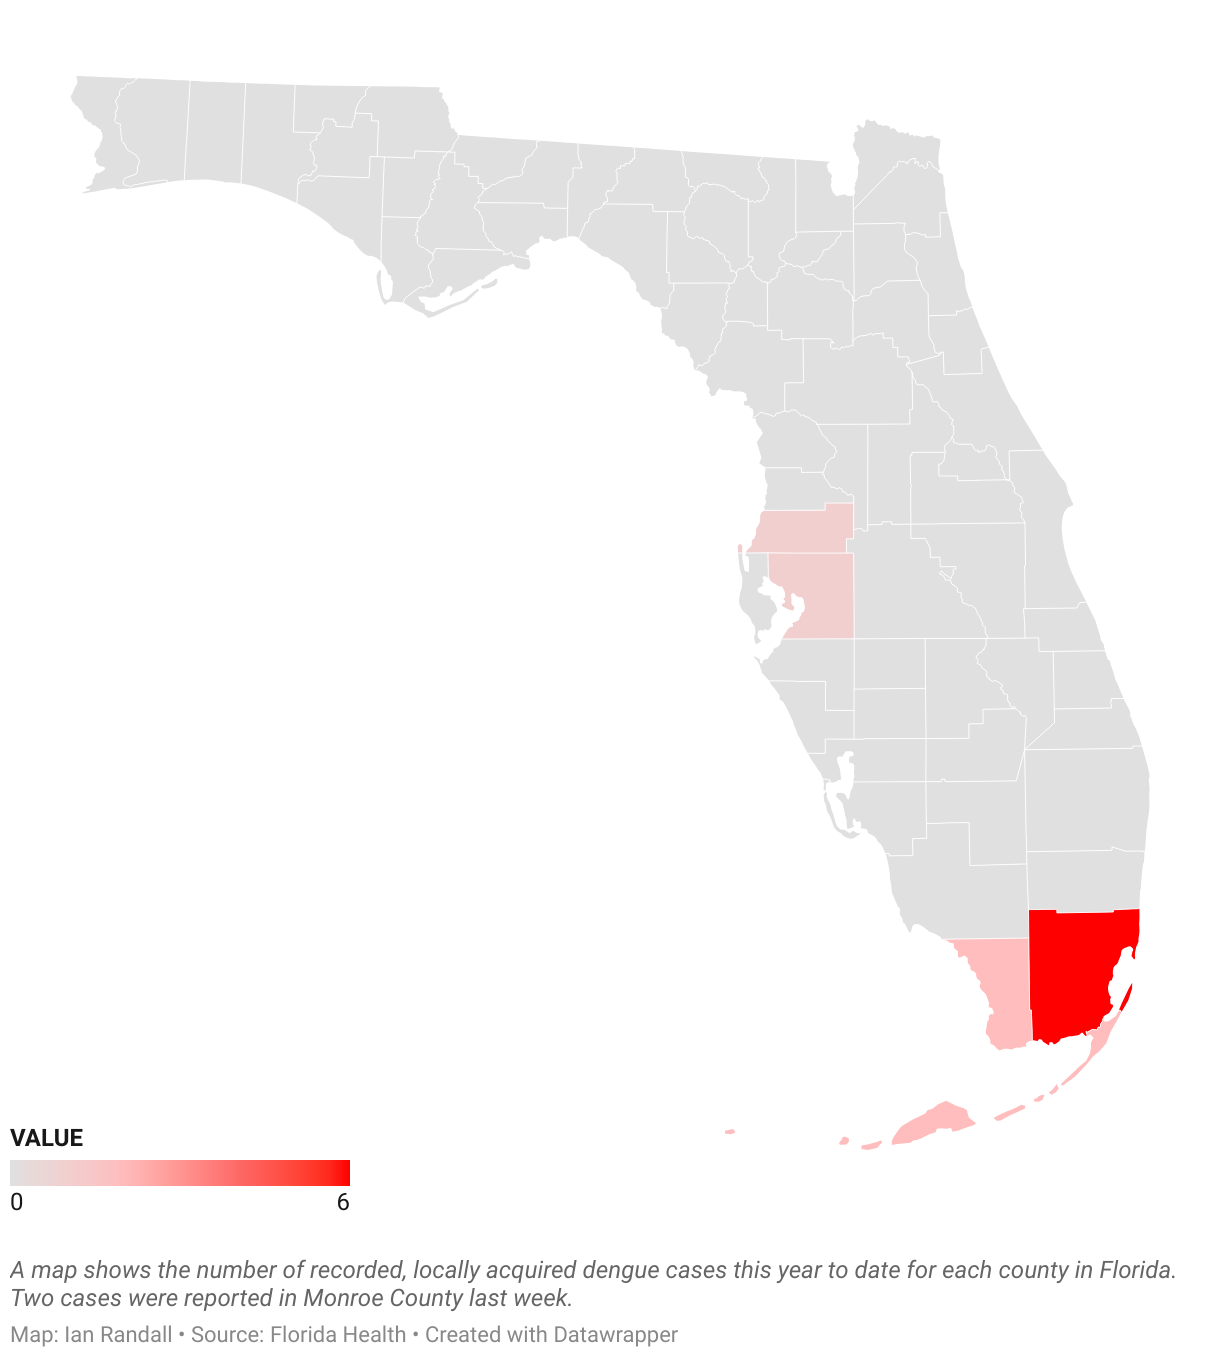 The map shows the number of locally acquired dengue cases recorded in each Florida county so far this year.